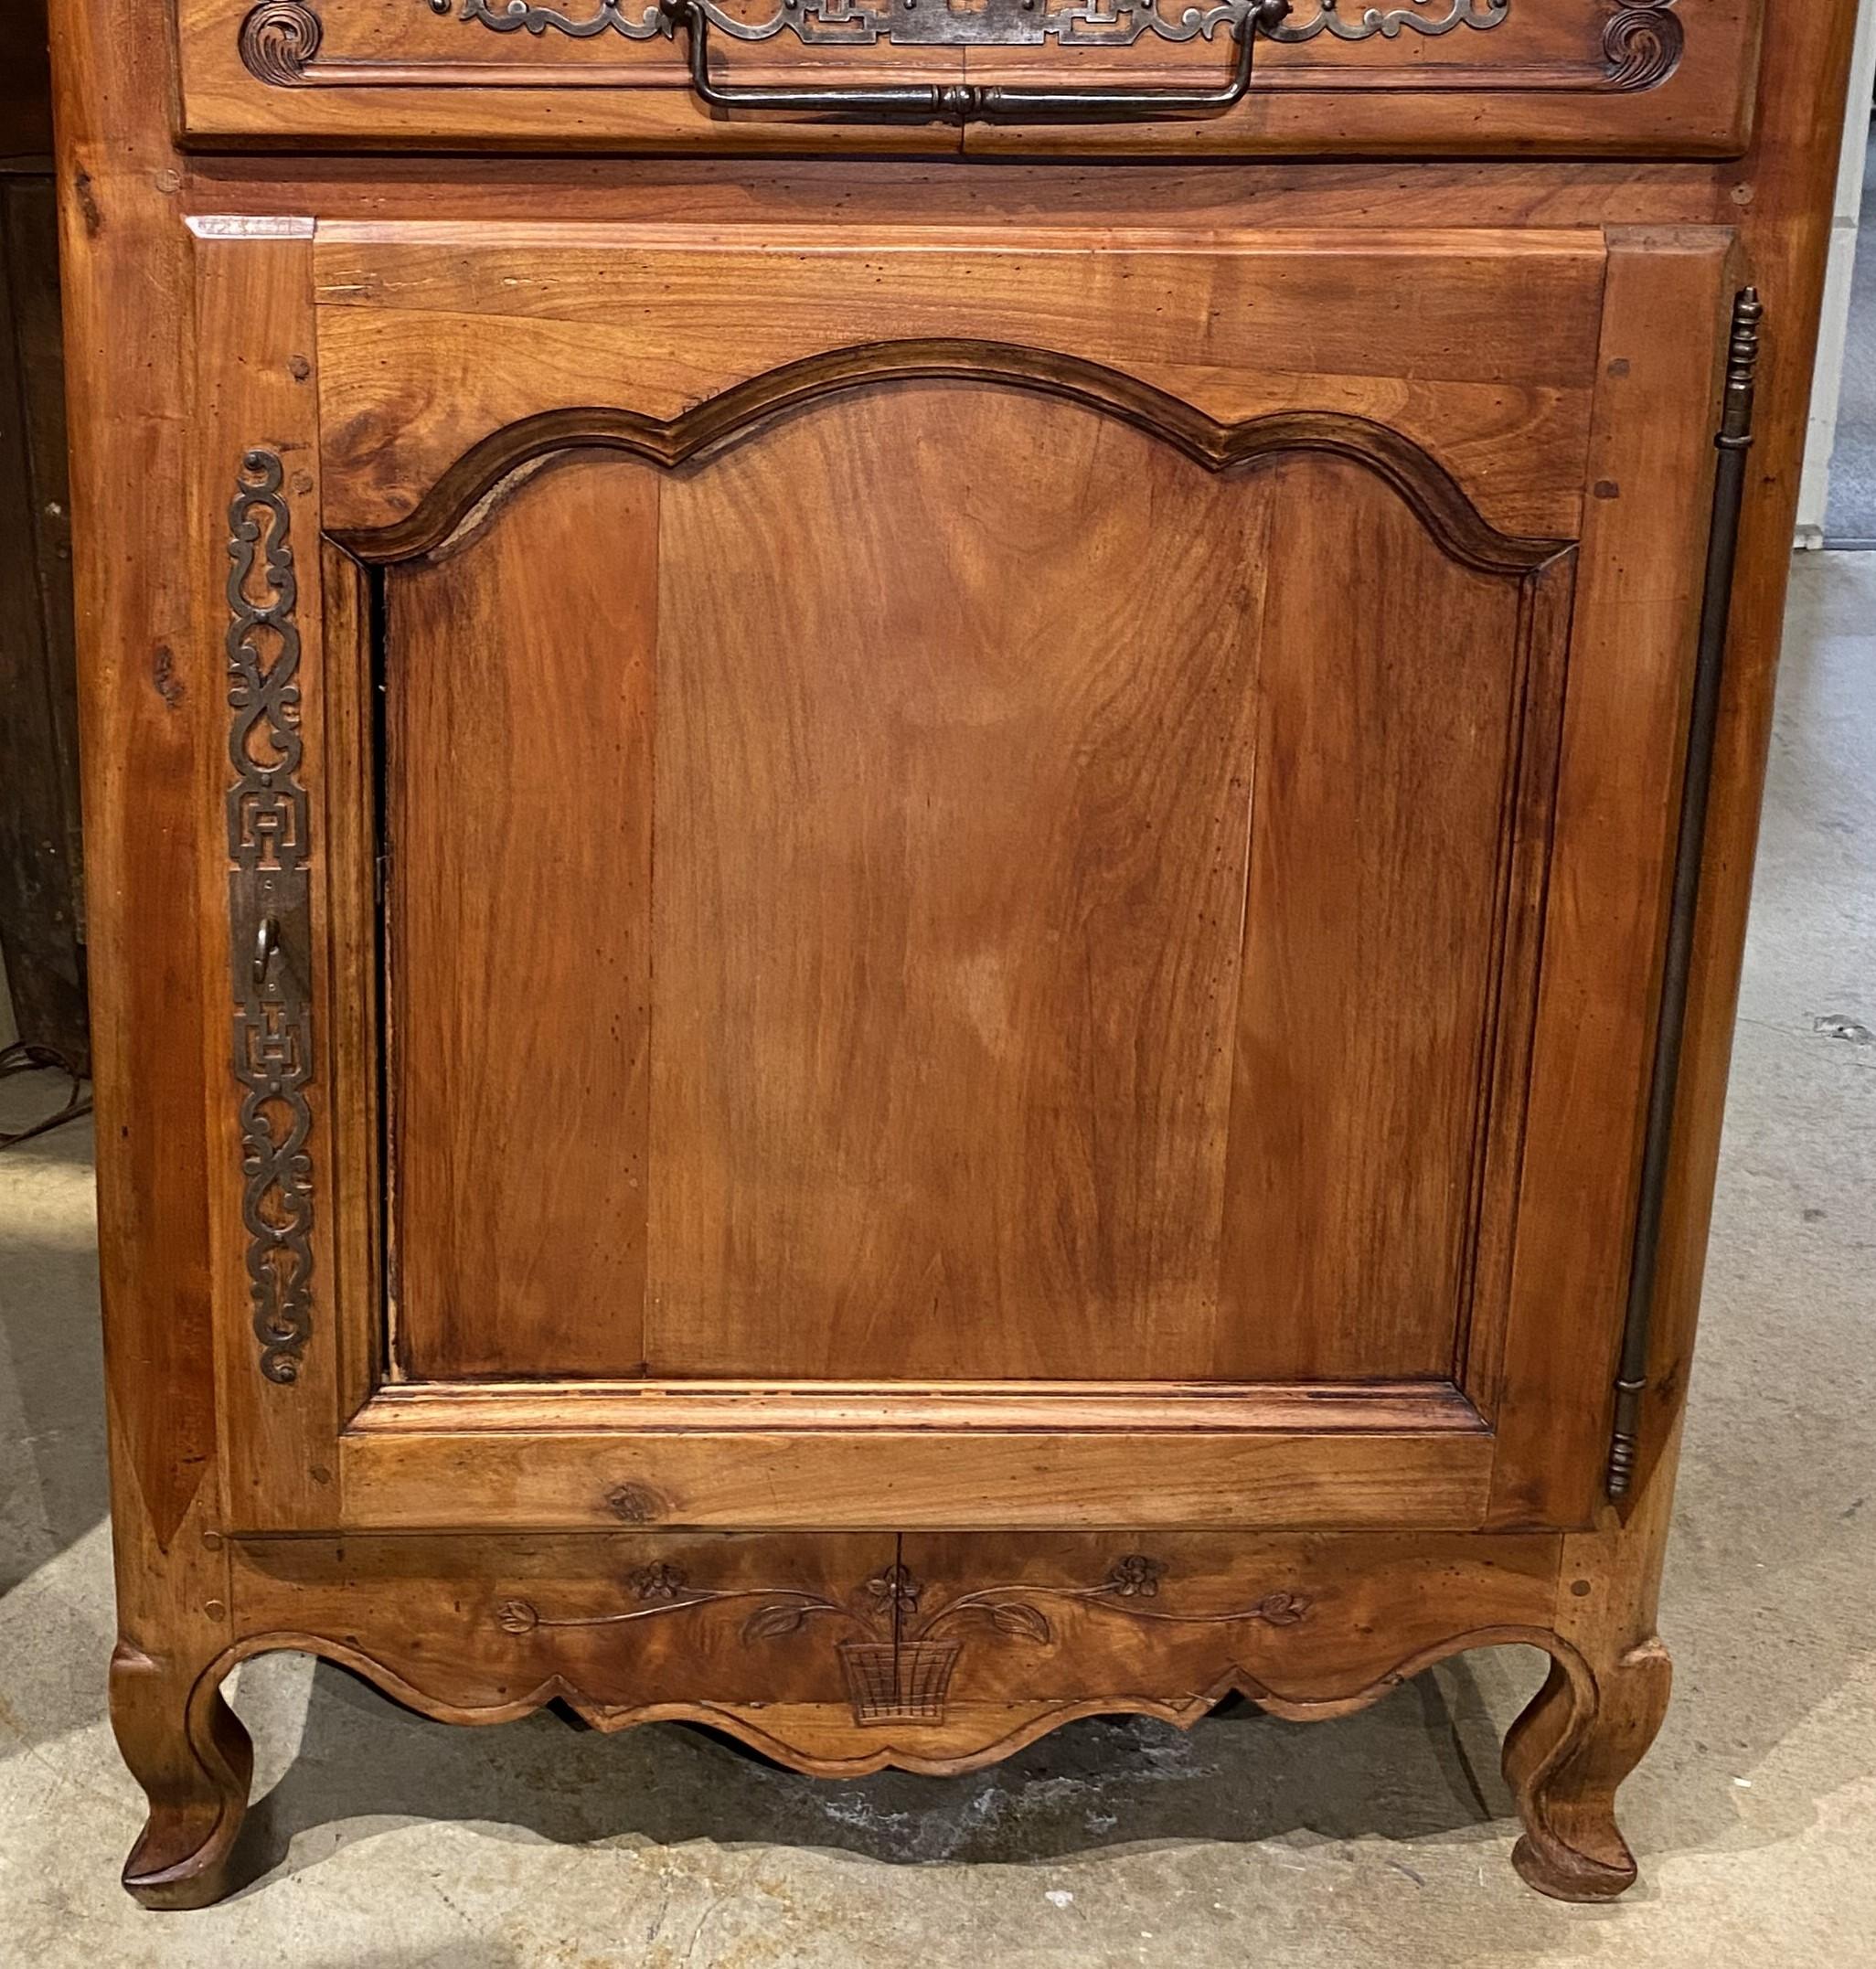 French Provincial French Country Two Door Fruitwood Cupboard with Carved Floral Detail For Sale